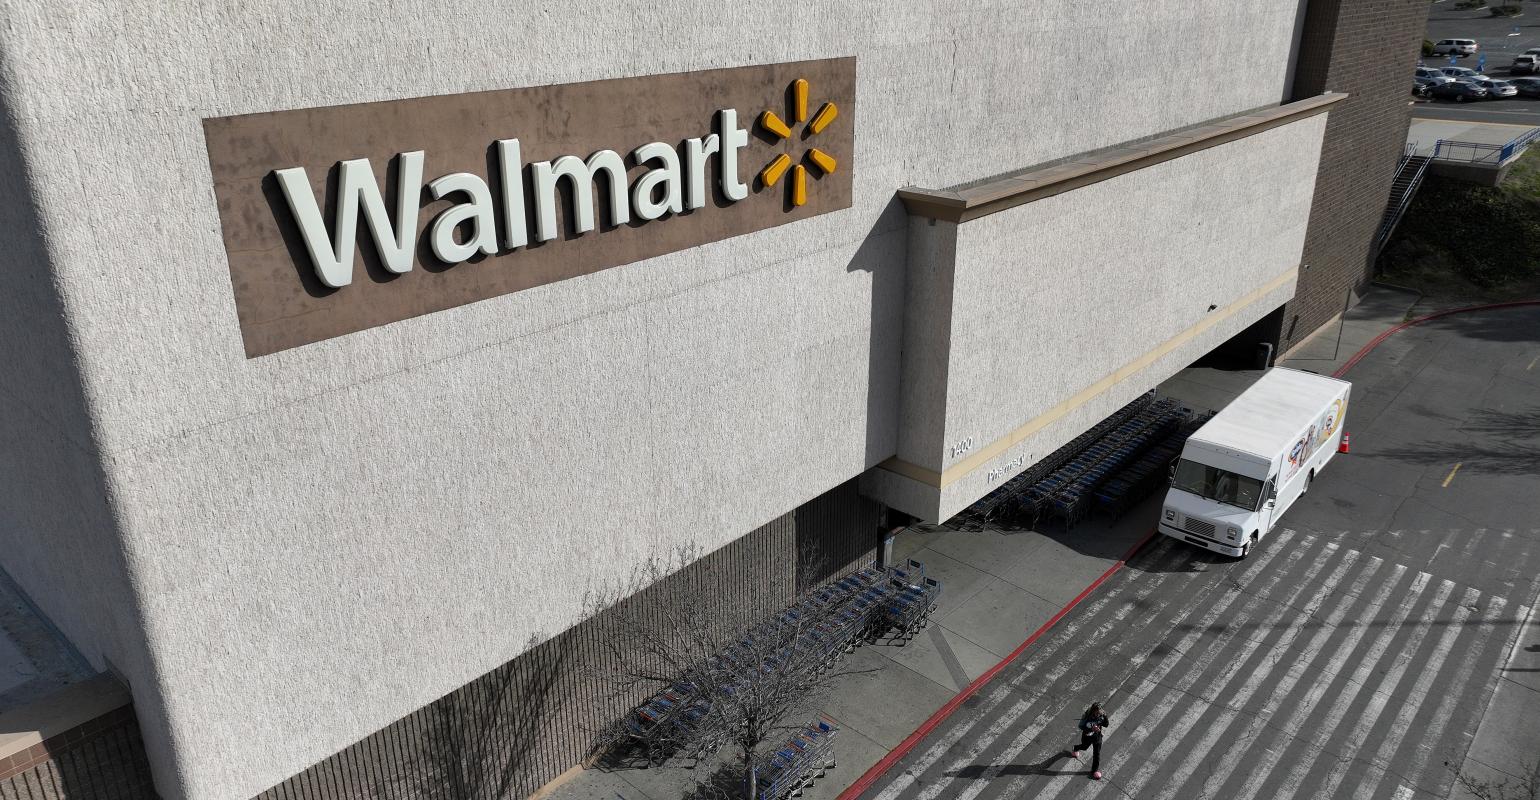 Walmart laying off hundreds of U.S. workers Reuters Supermarket News